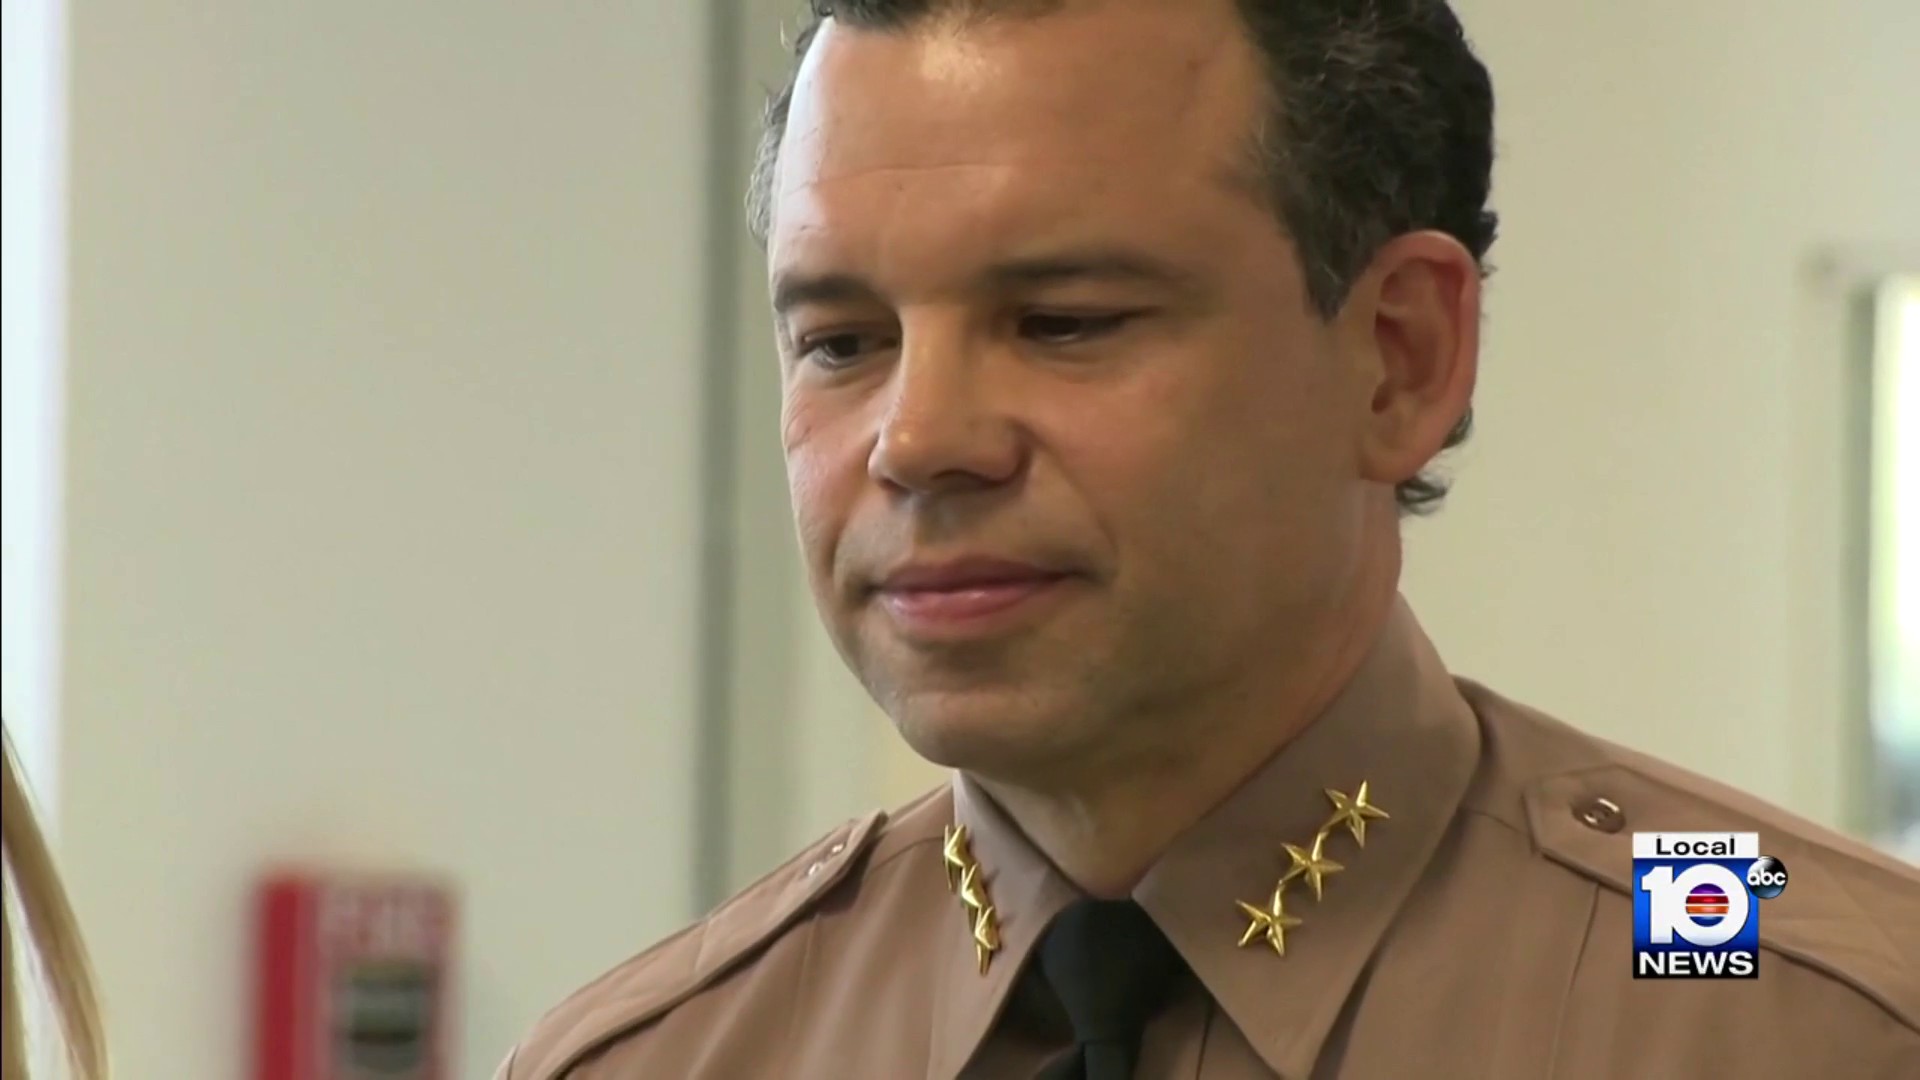 Sources Miami-Dade Police Director Freddy Ramirez has been speaking from hospital